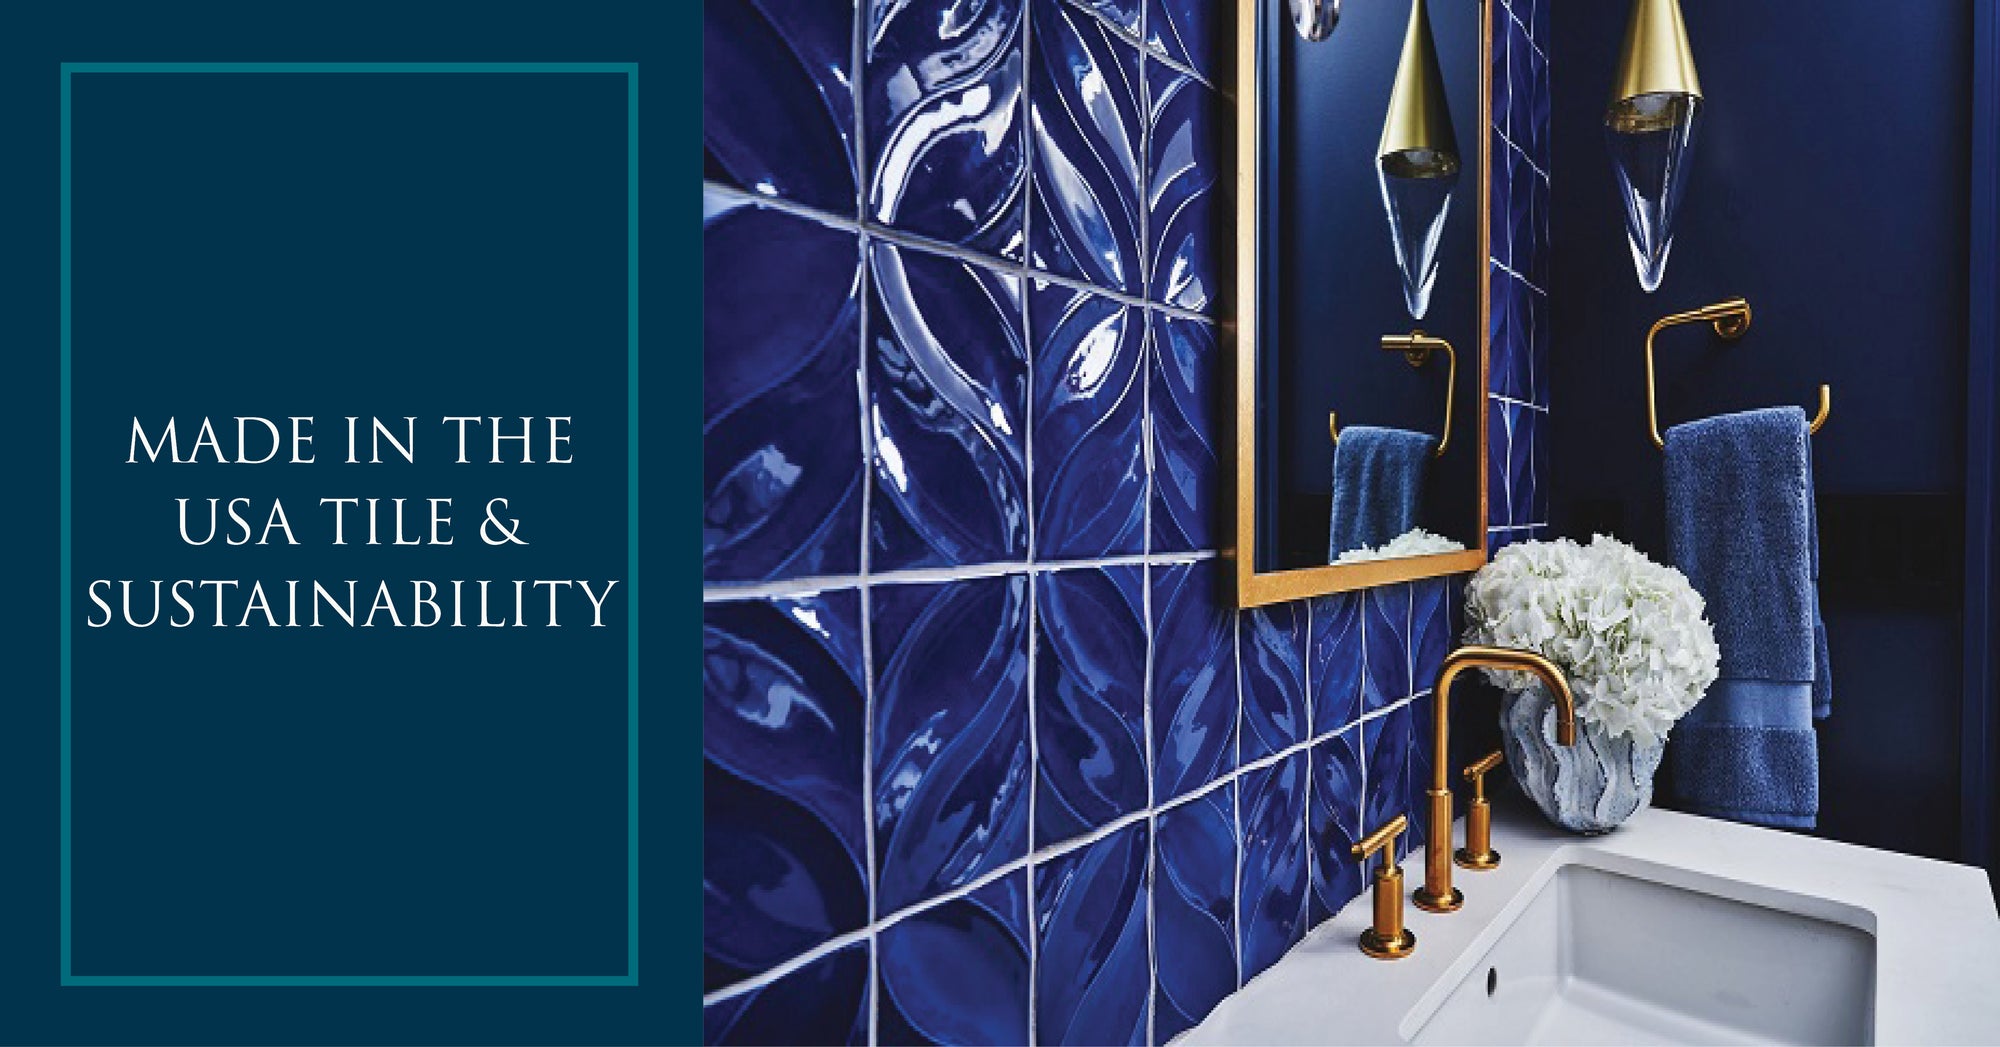 Made in the USA Tile & Sustainability - Architessa